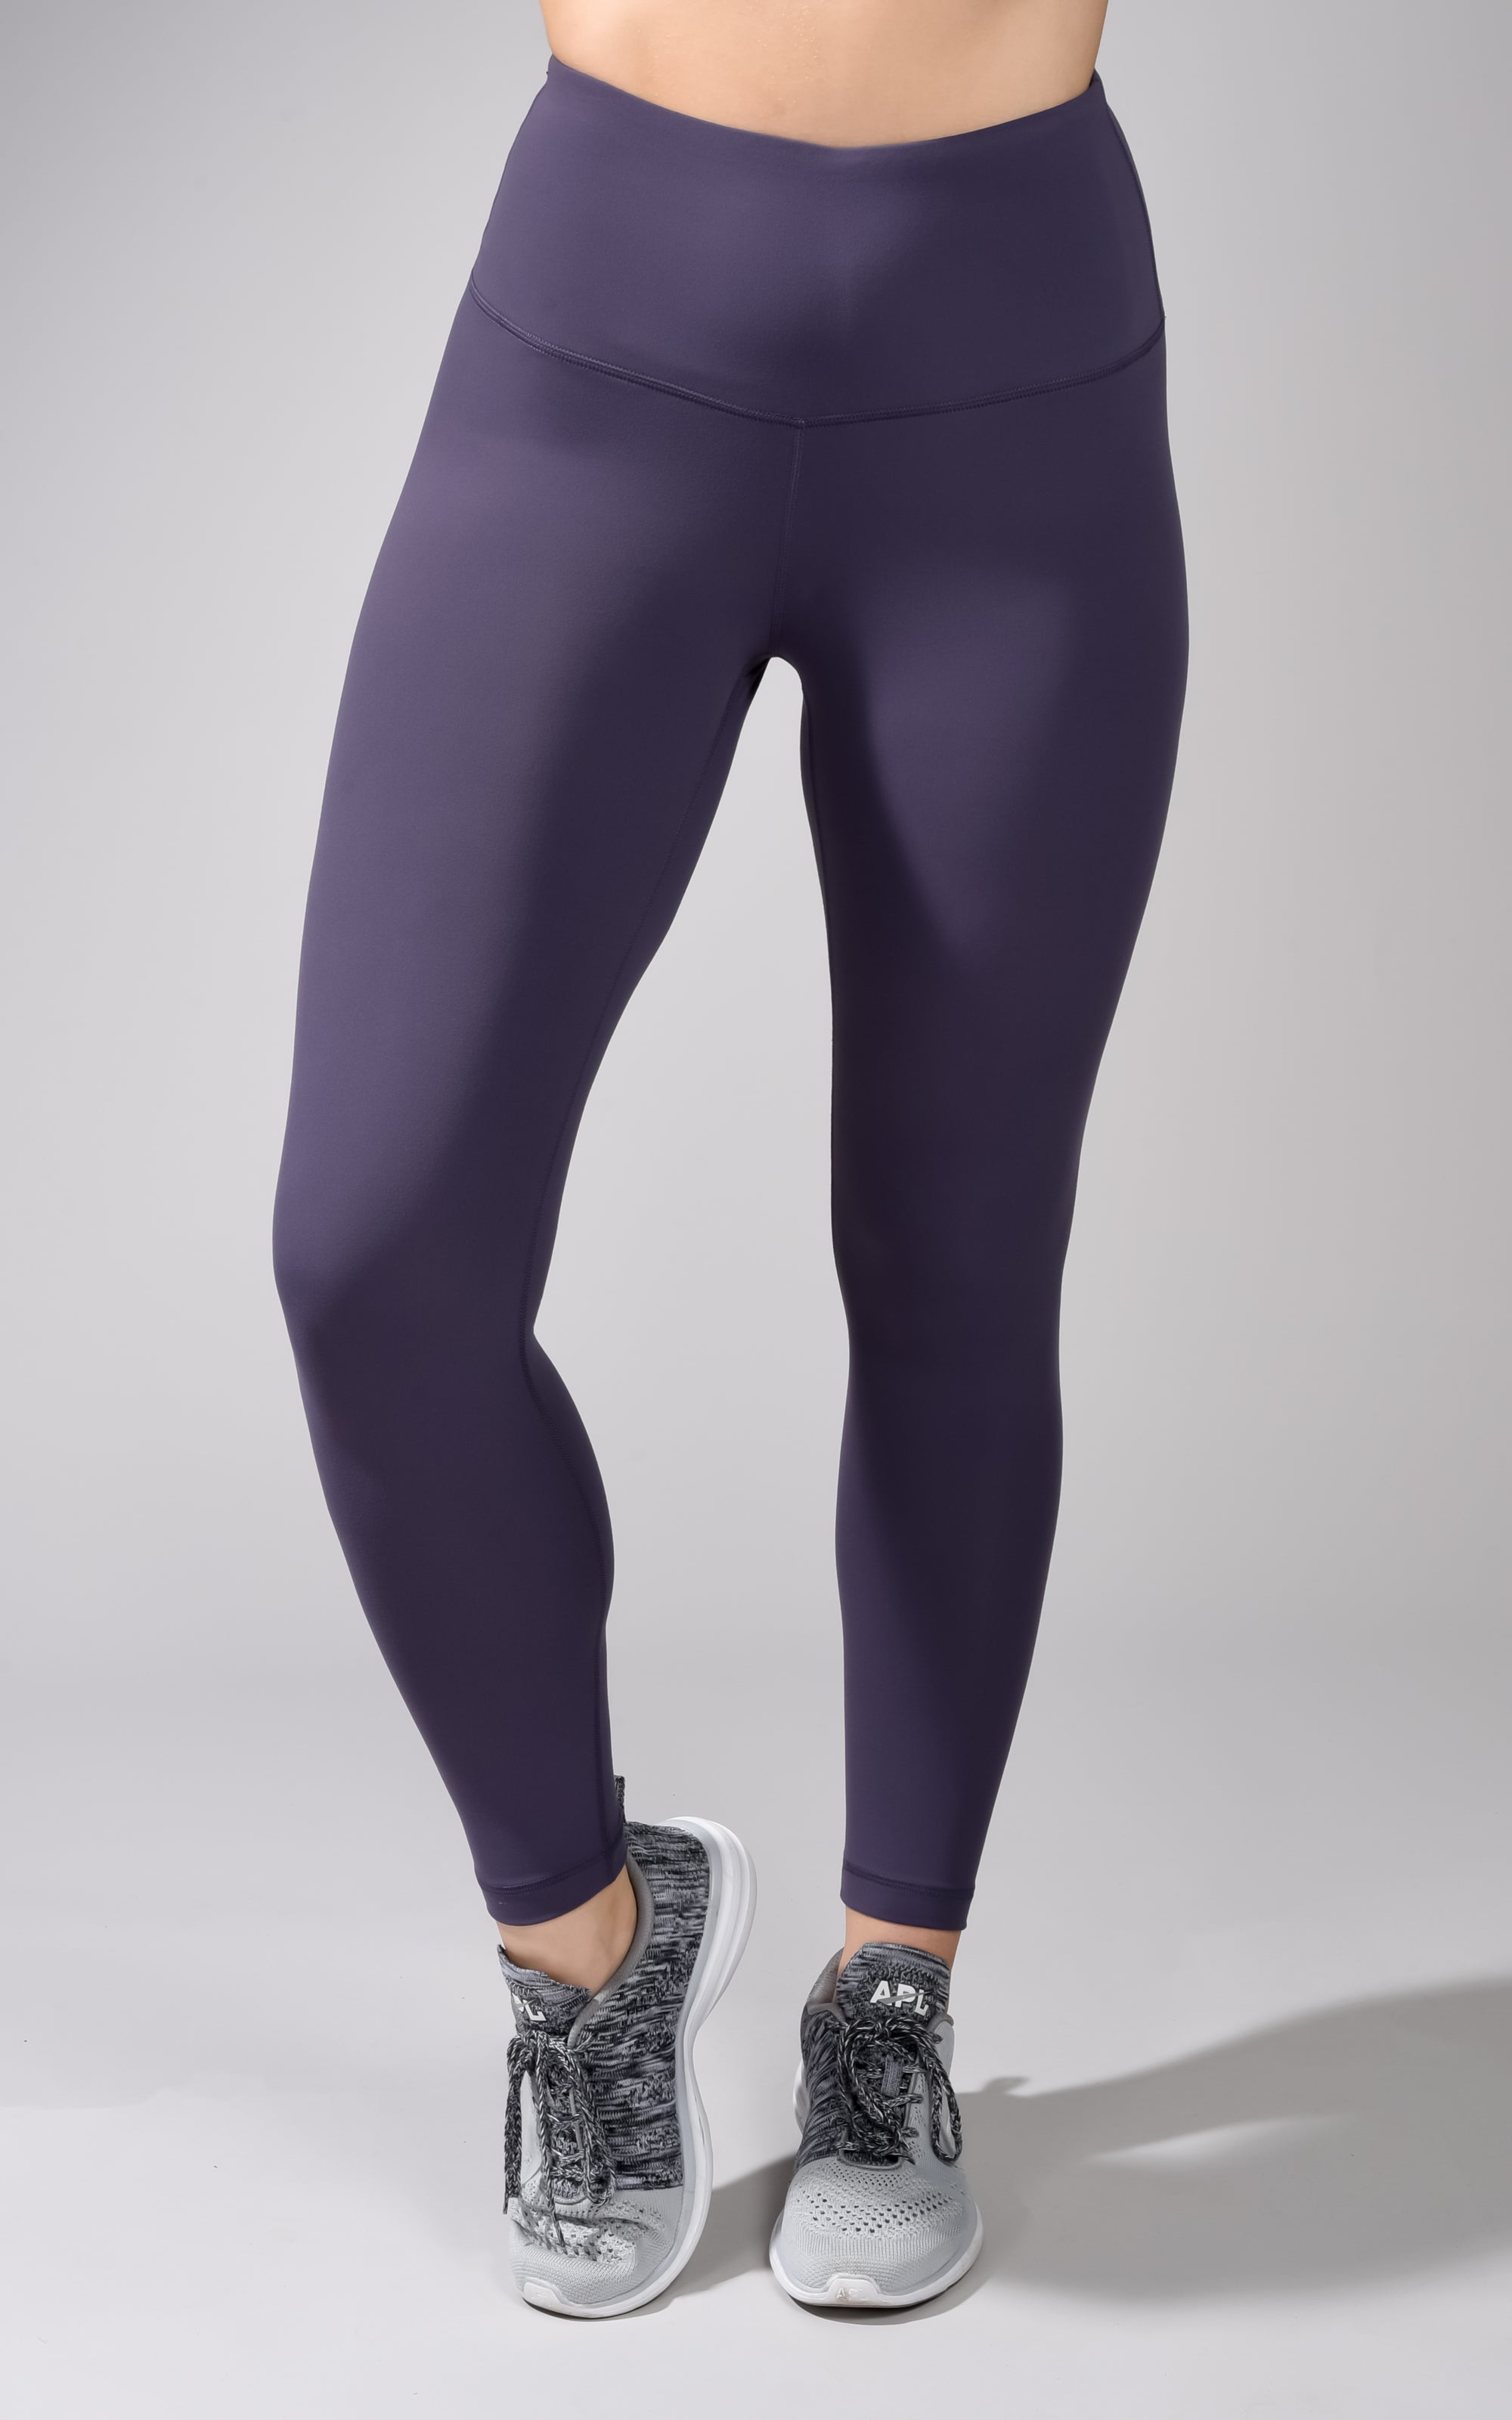 Yogalicious - Women's Nude Tech Water Droplet High Waist Ankle Legging :  Target